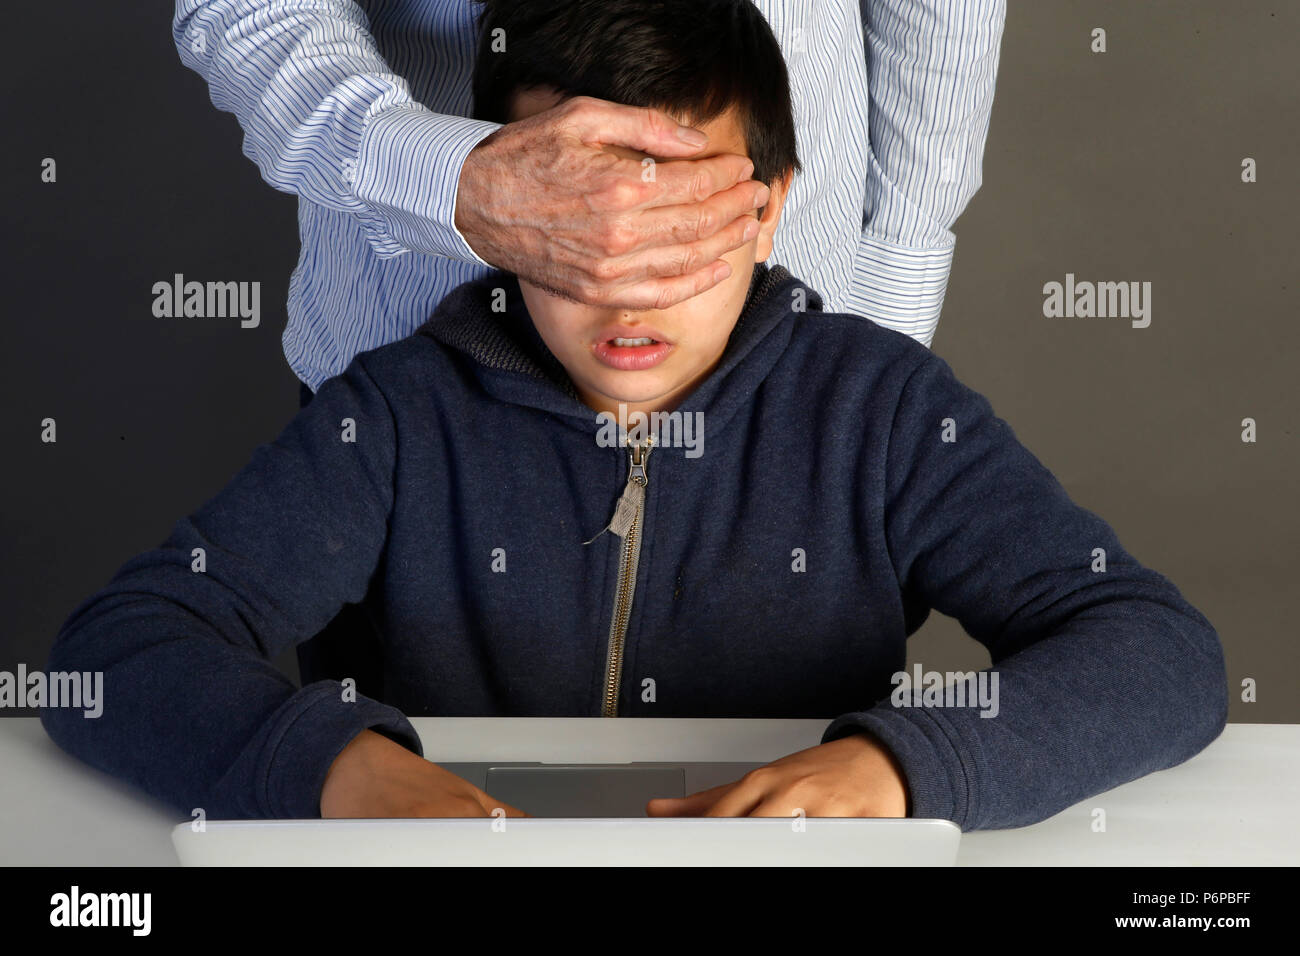 12-year-old boy forbidden to look at an internet site. Paris, France. Stock Photo